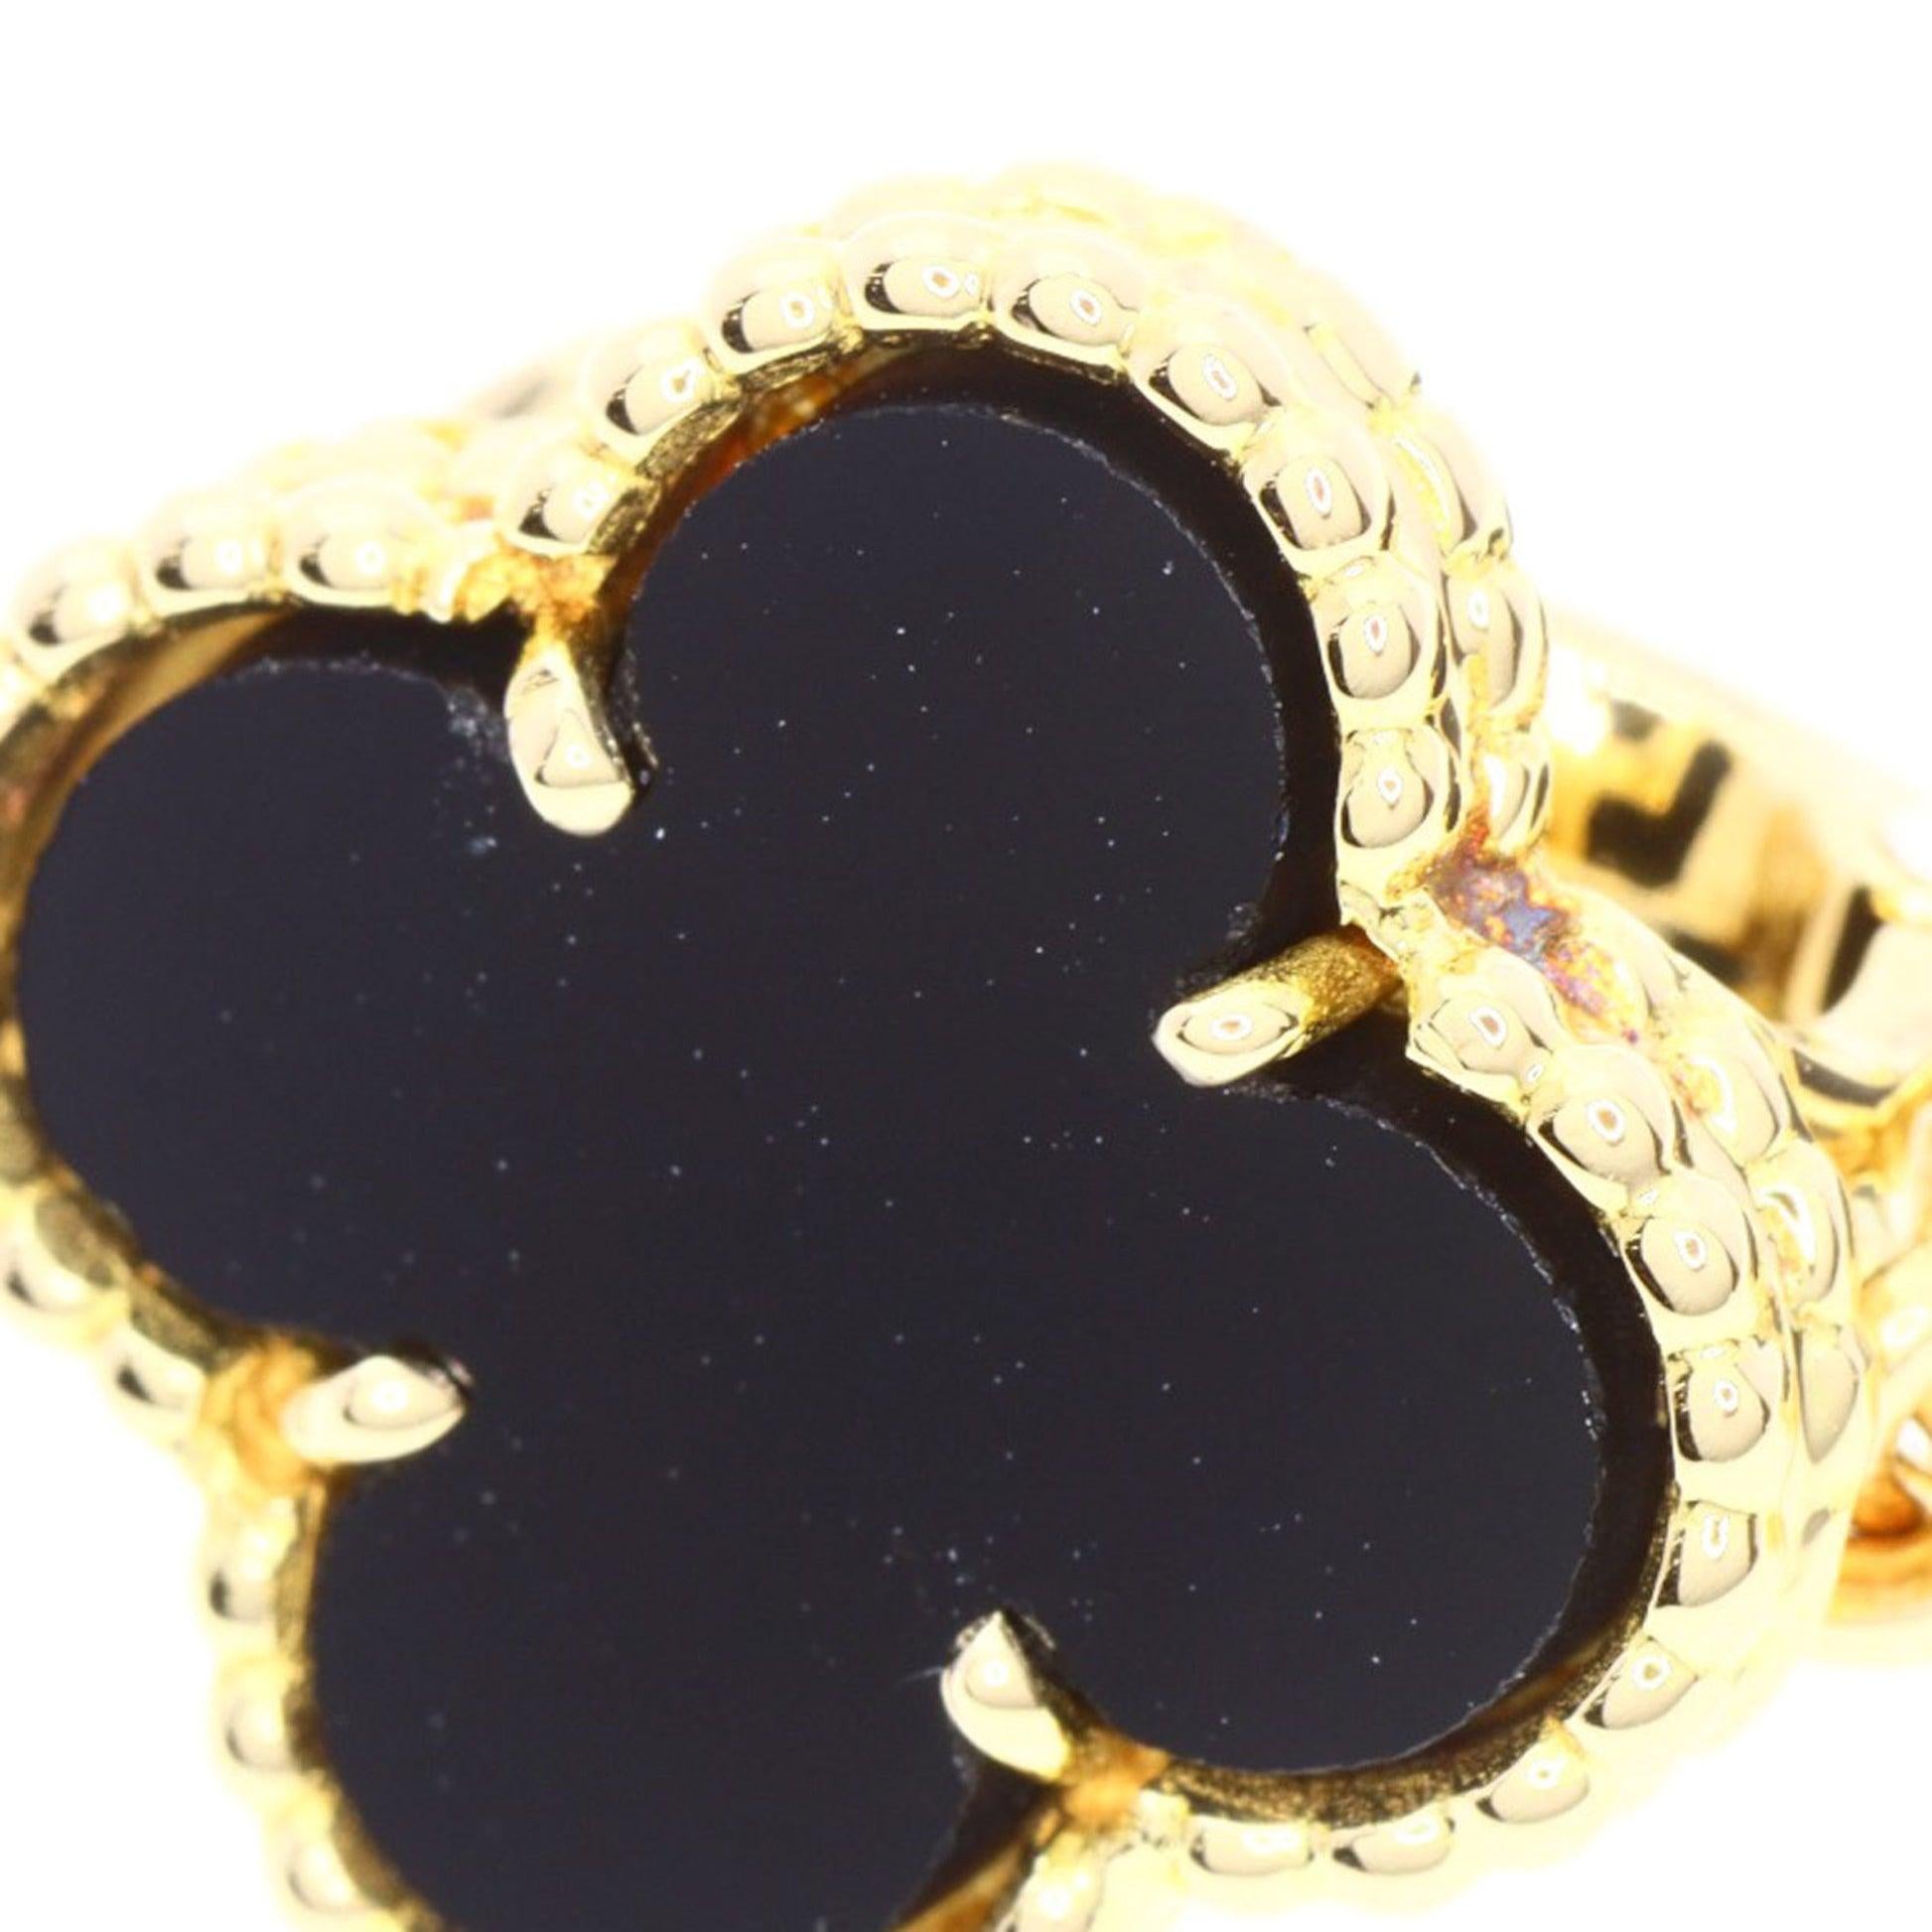 Van Cleef & Arpels Magic Alhambra Onyx Earrings in 18K Yellow Gold

Additional Information:
Brand: Van Cleef & Arpels
Gender: Women
Line: Alhambra
Gemstone: Onyx
Earring type: Clip earrings
Material: Yellow gold (18K)
Condition details:This item has